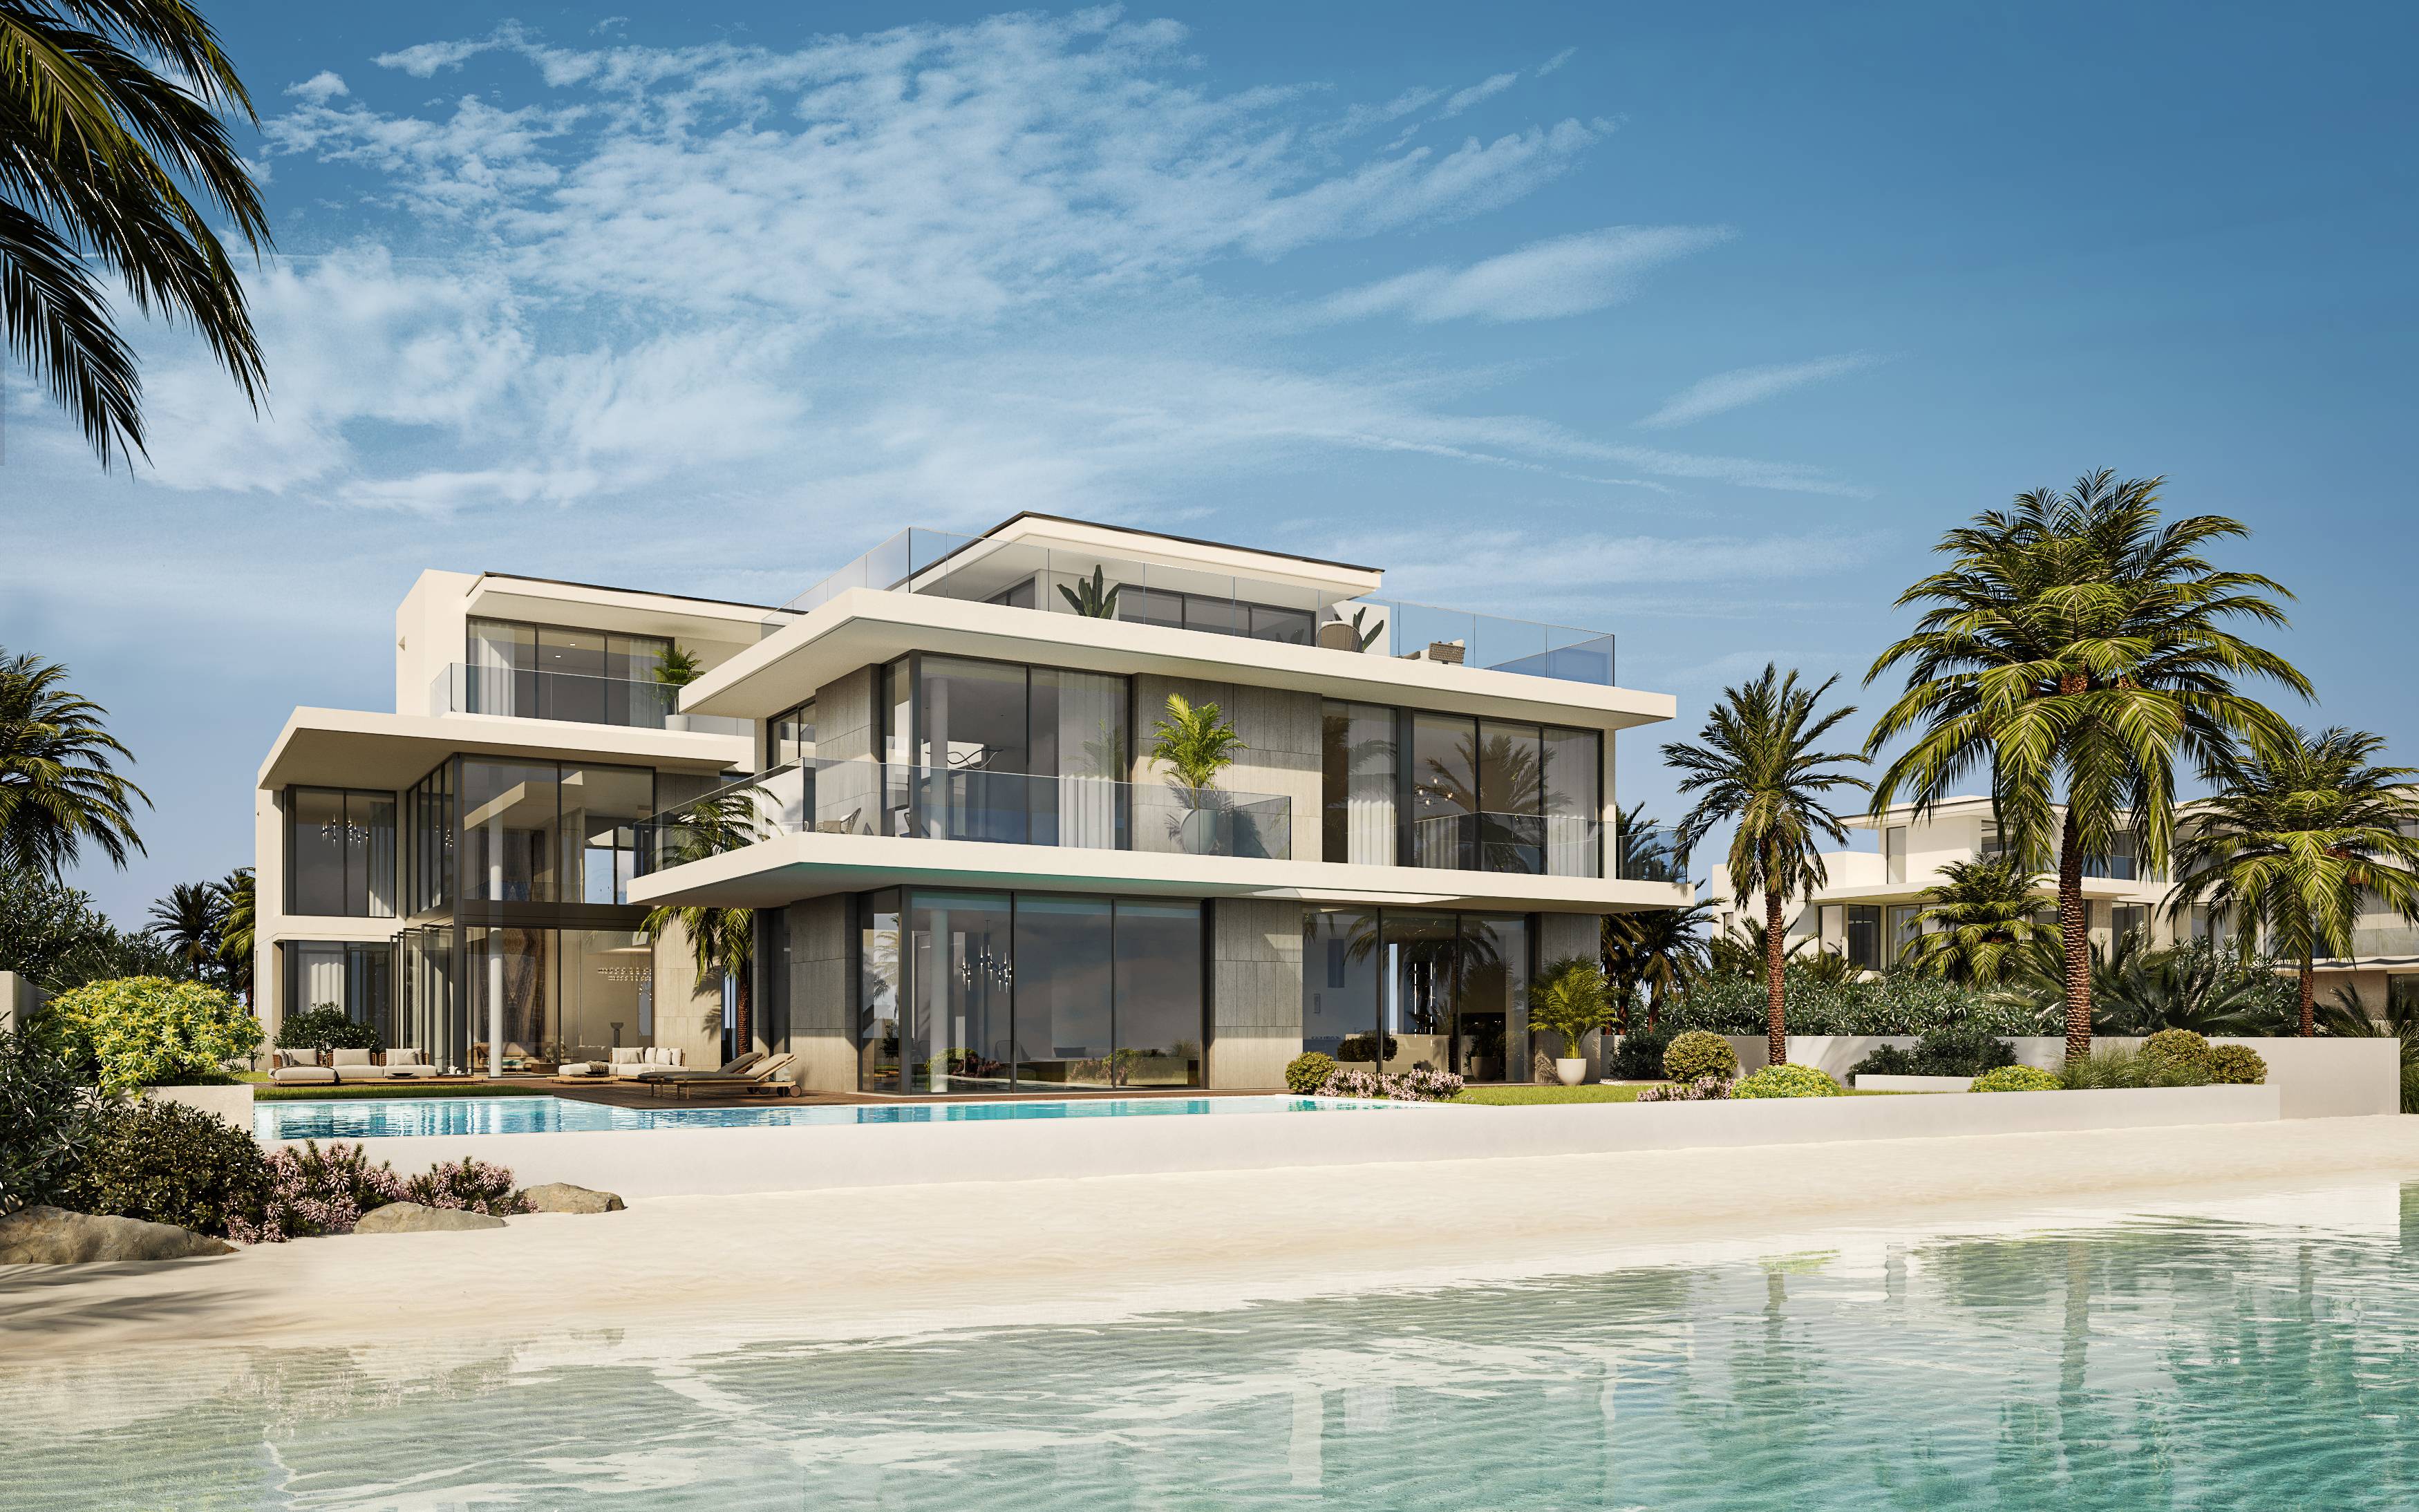 EXQUISITE 7-BEDROOM MANSION WITH CRYSTAL LAGOON VIEWS IN MBR DISTRICT - A NAKHEEL MASTERPIECE OF LUXURY LIVING